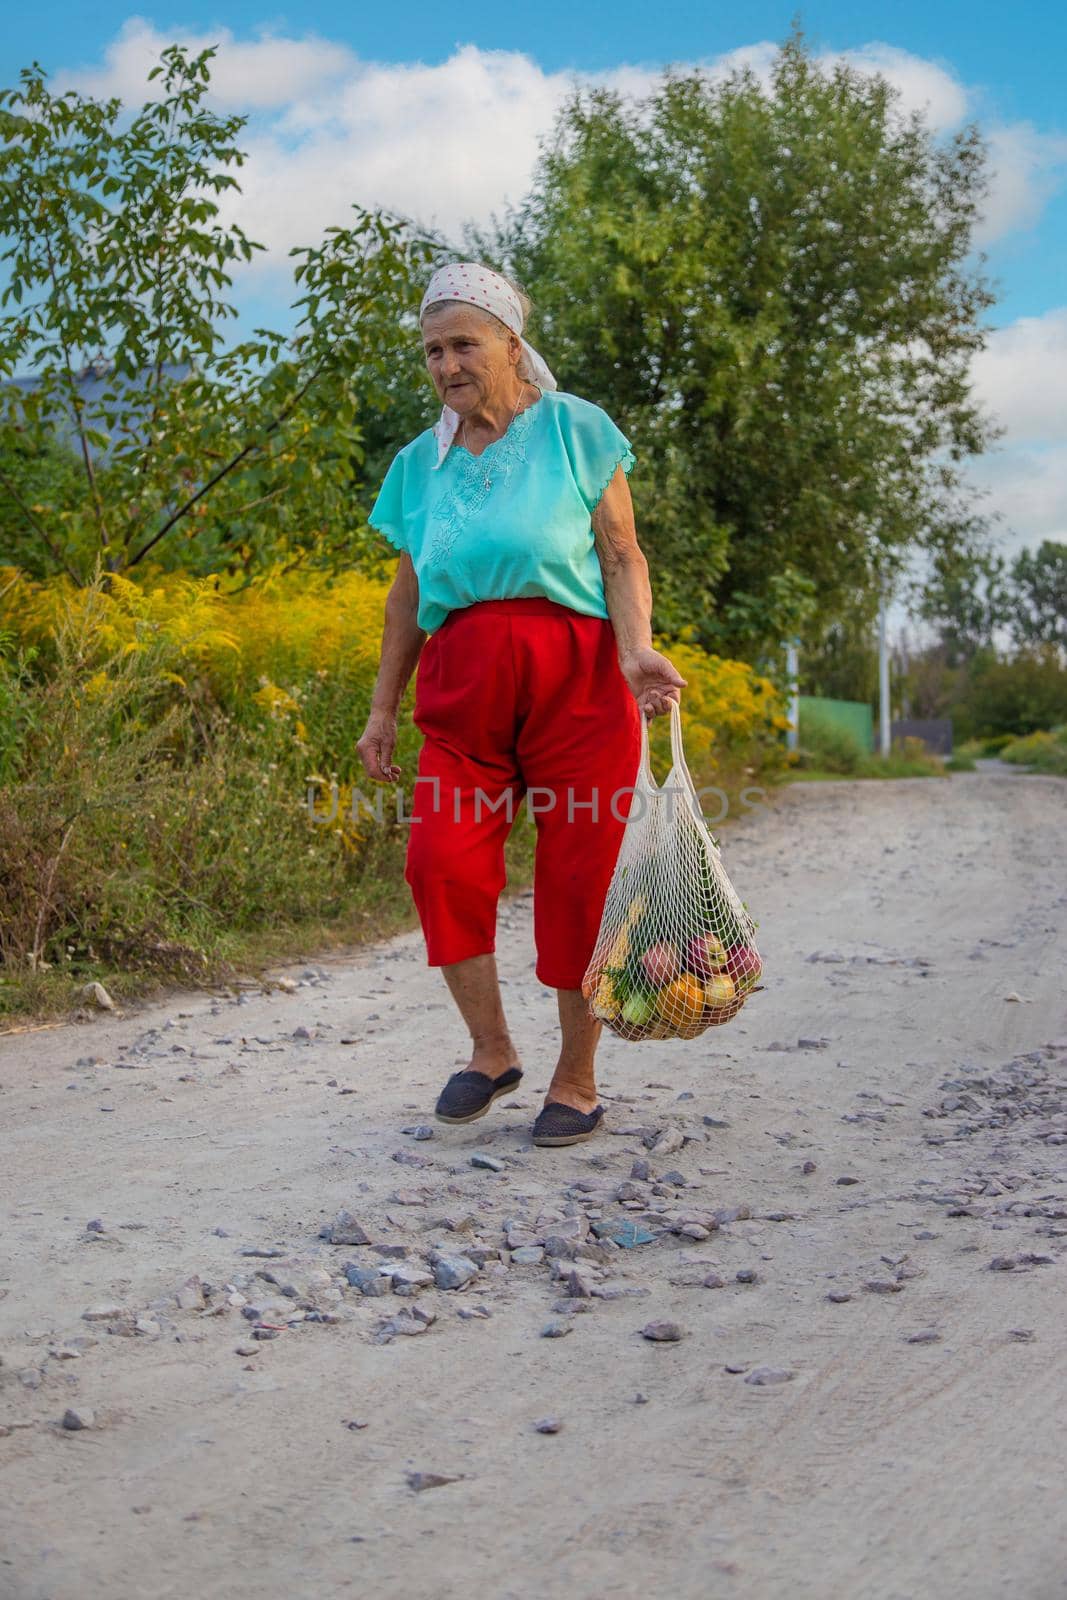 Grandmother carries vegetables in a shopping bag. Selective focus. Food.